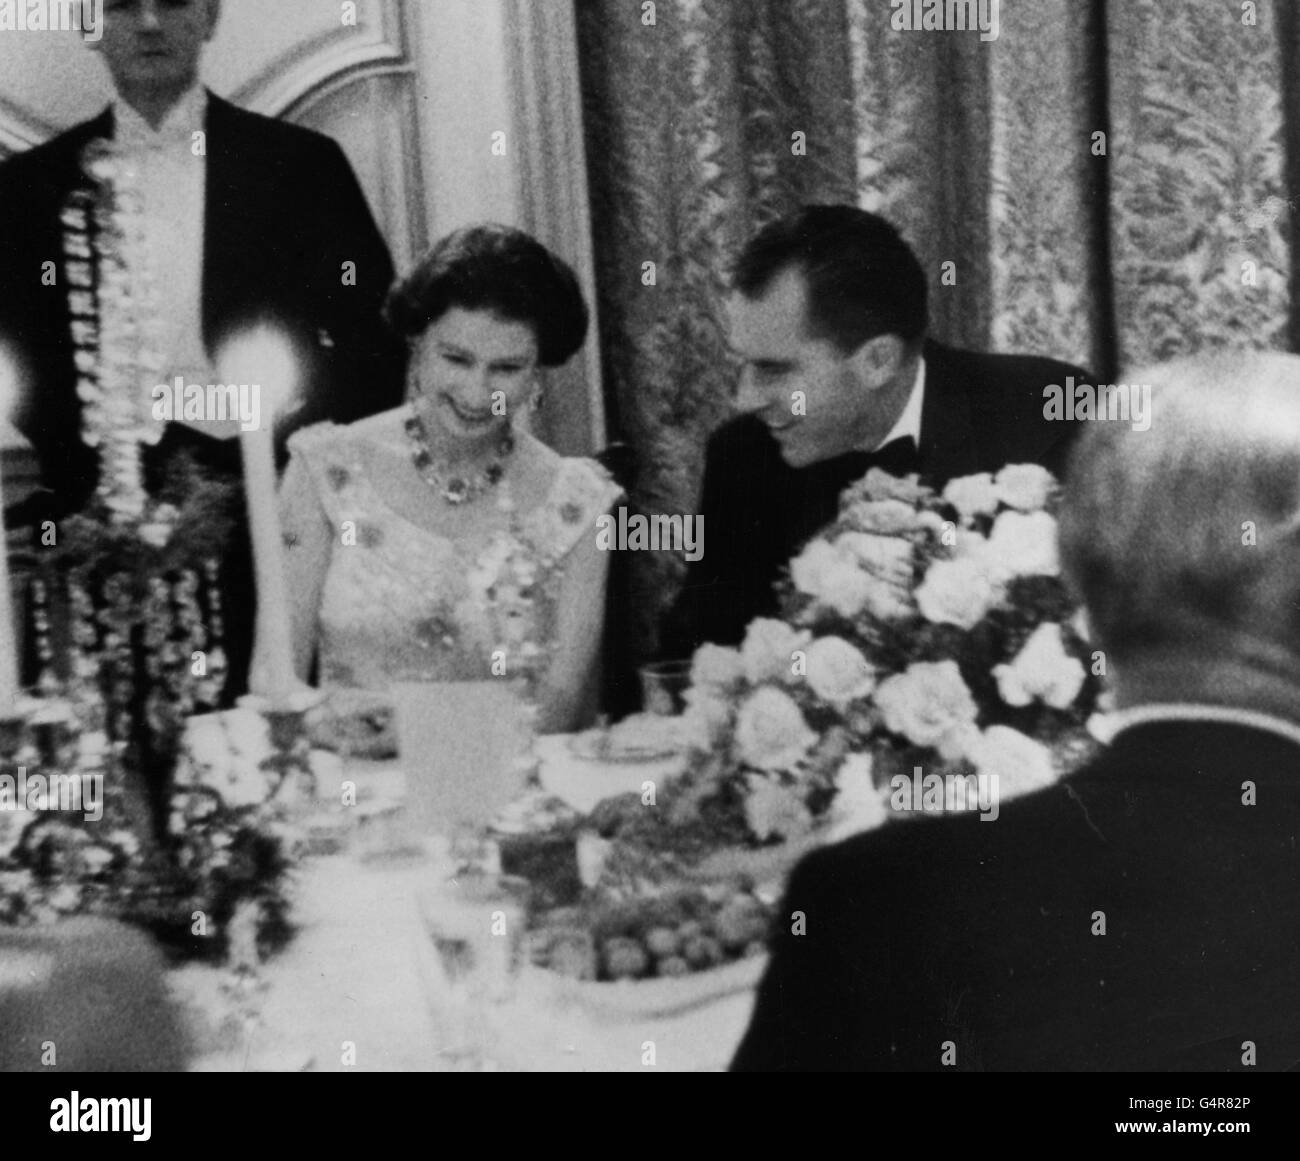 The queen elizabeth ii dinner table Black and White Stock Photos ...